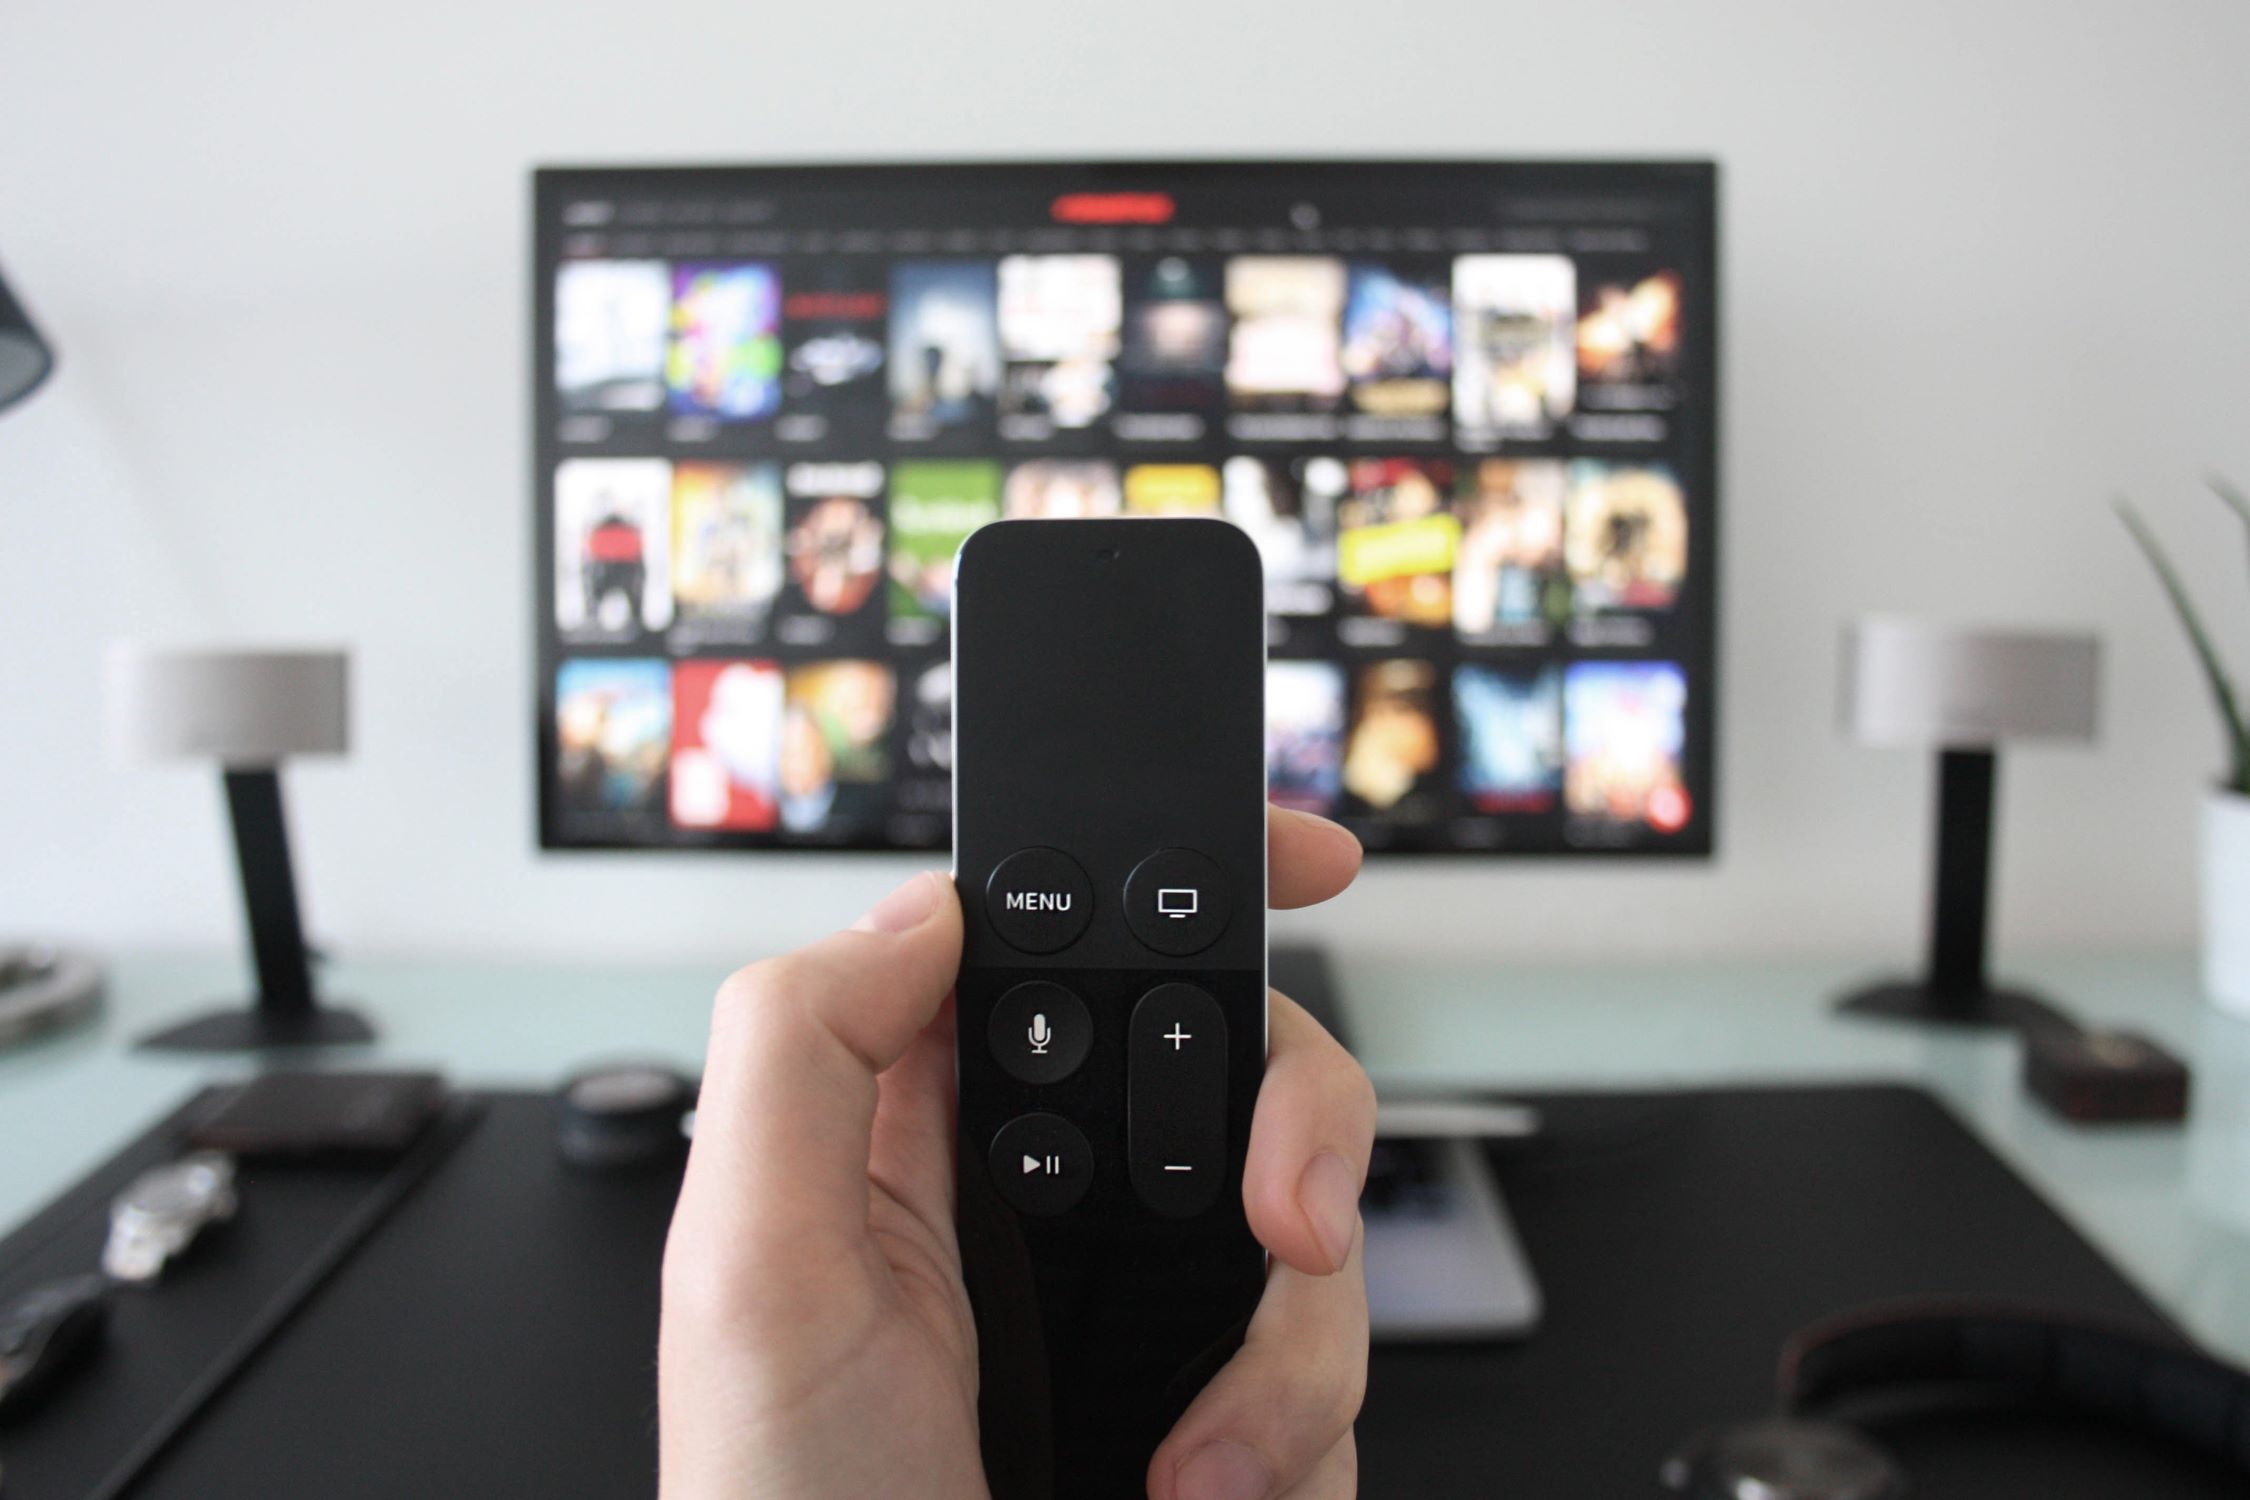 How To Turn Off Voice Over On Apple TV